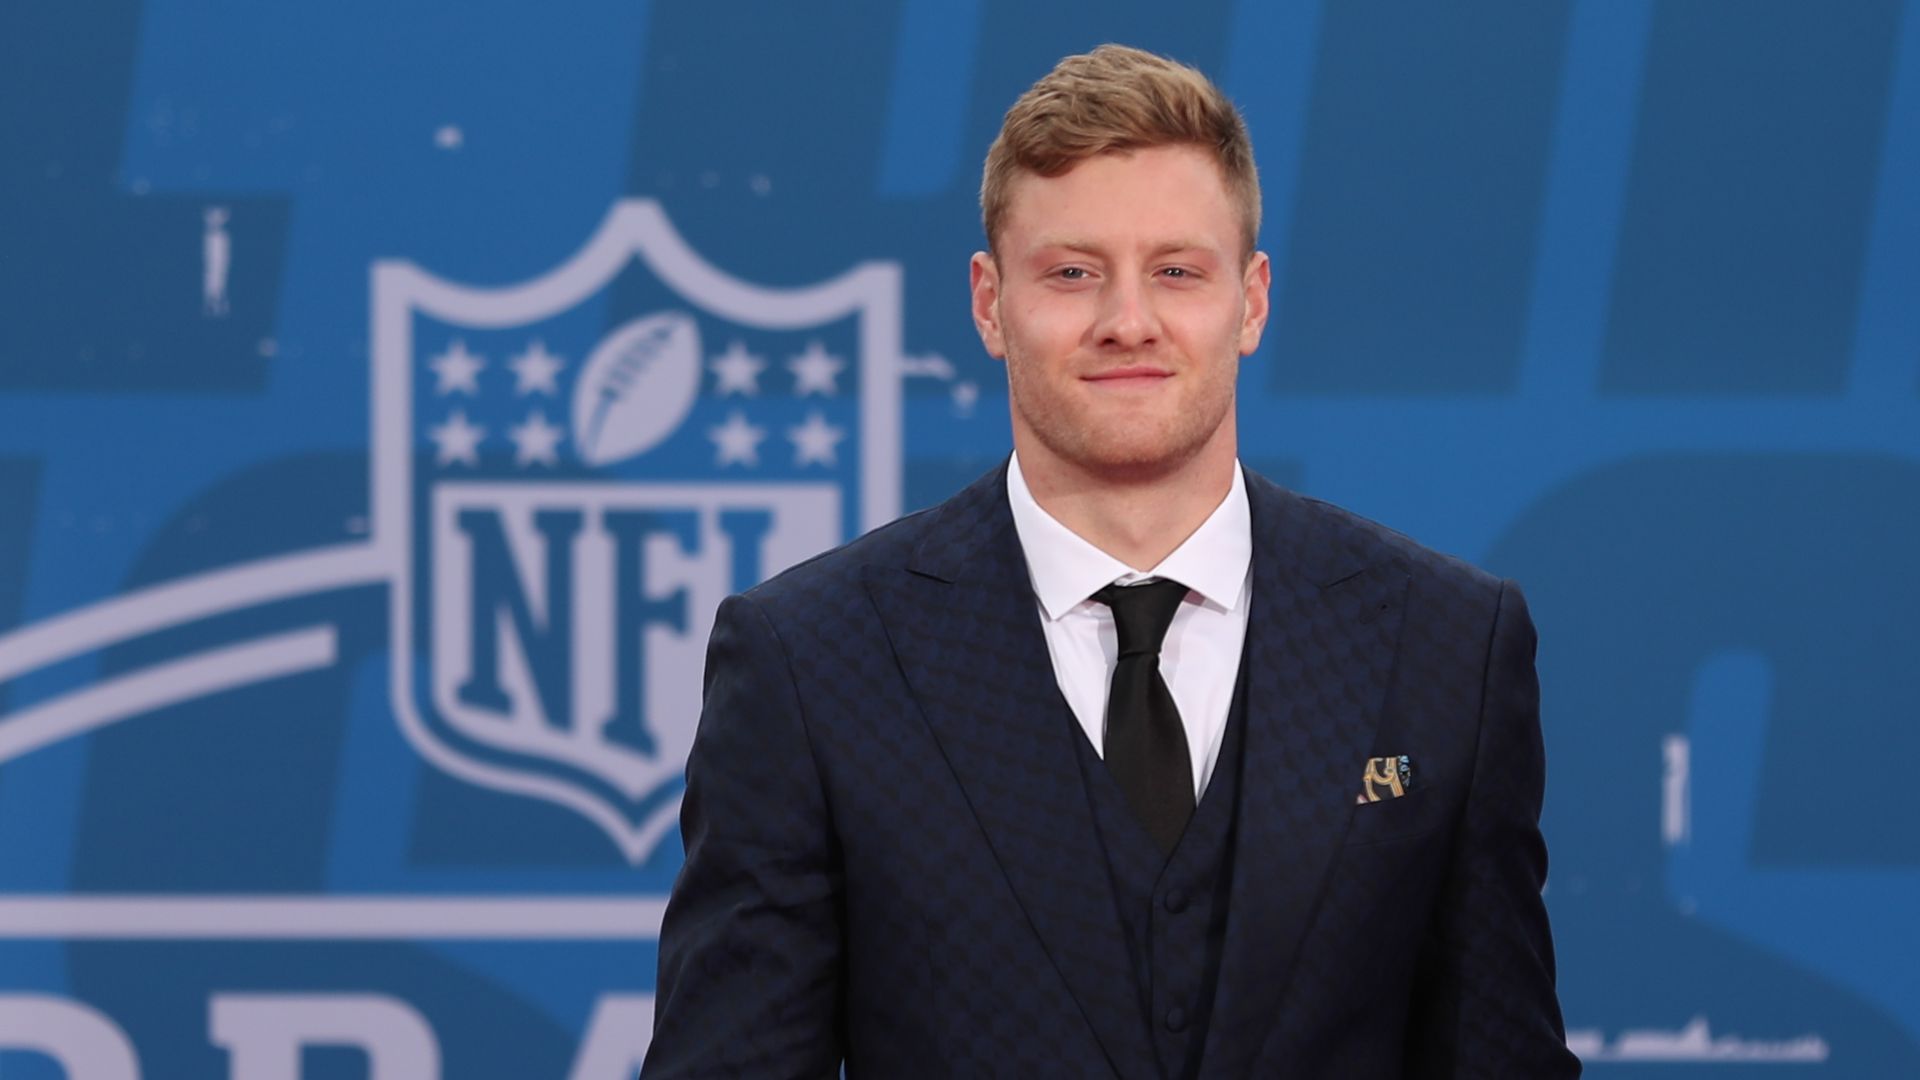 Kentucky quarterback Will Levis during the NFL Draft Red Carpet event on April 27, 2023 at Union Station in Kansas City, MO.